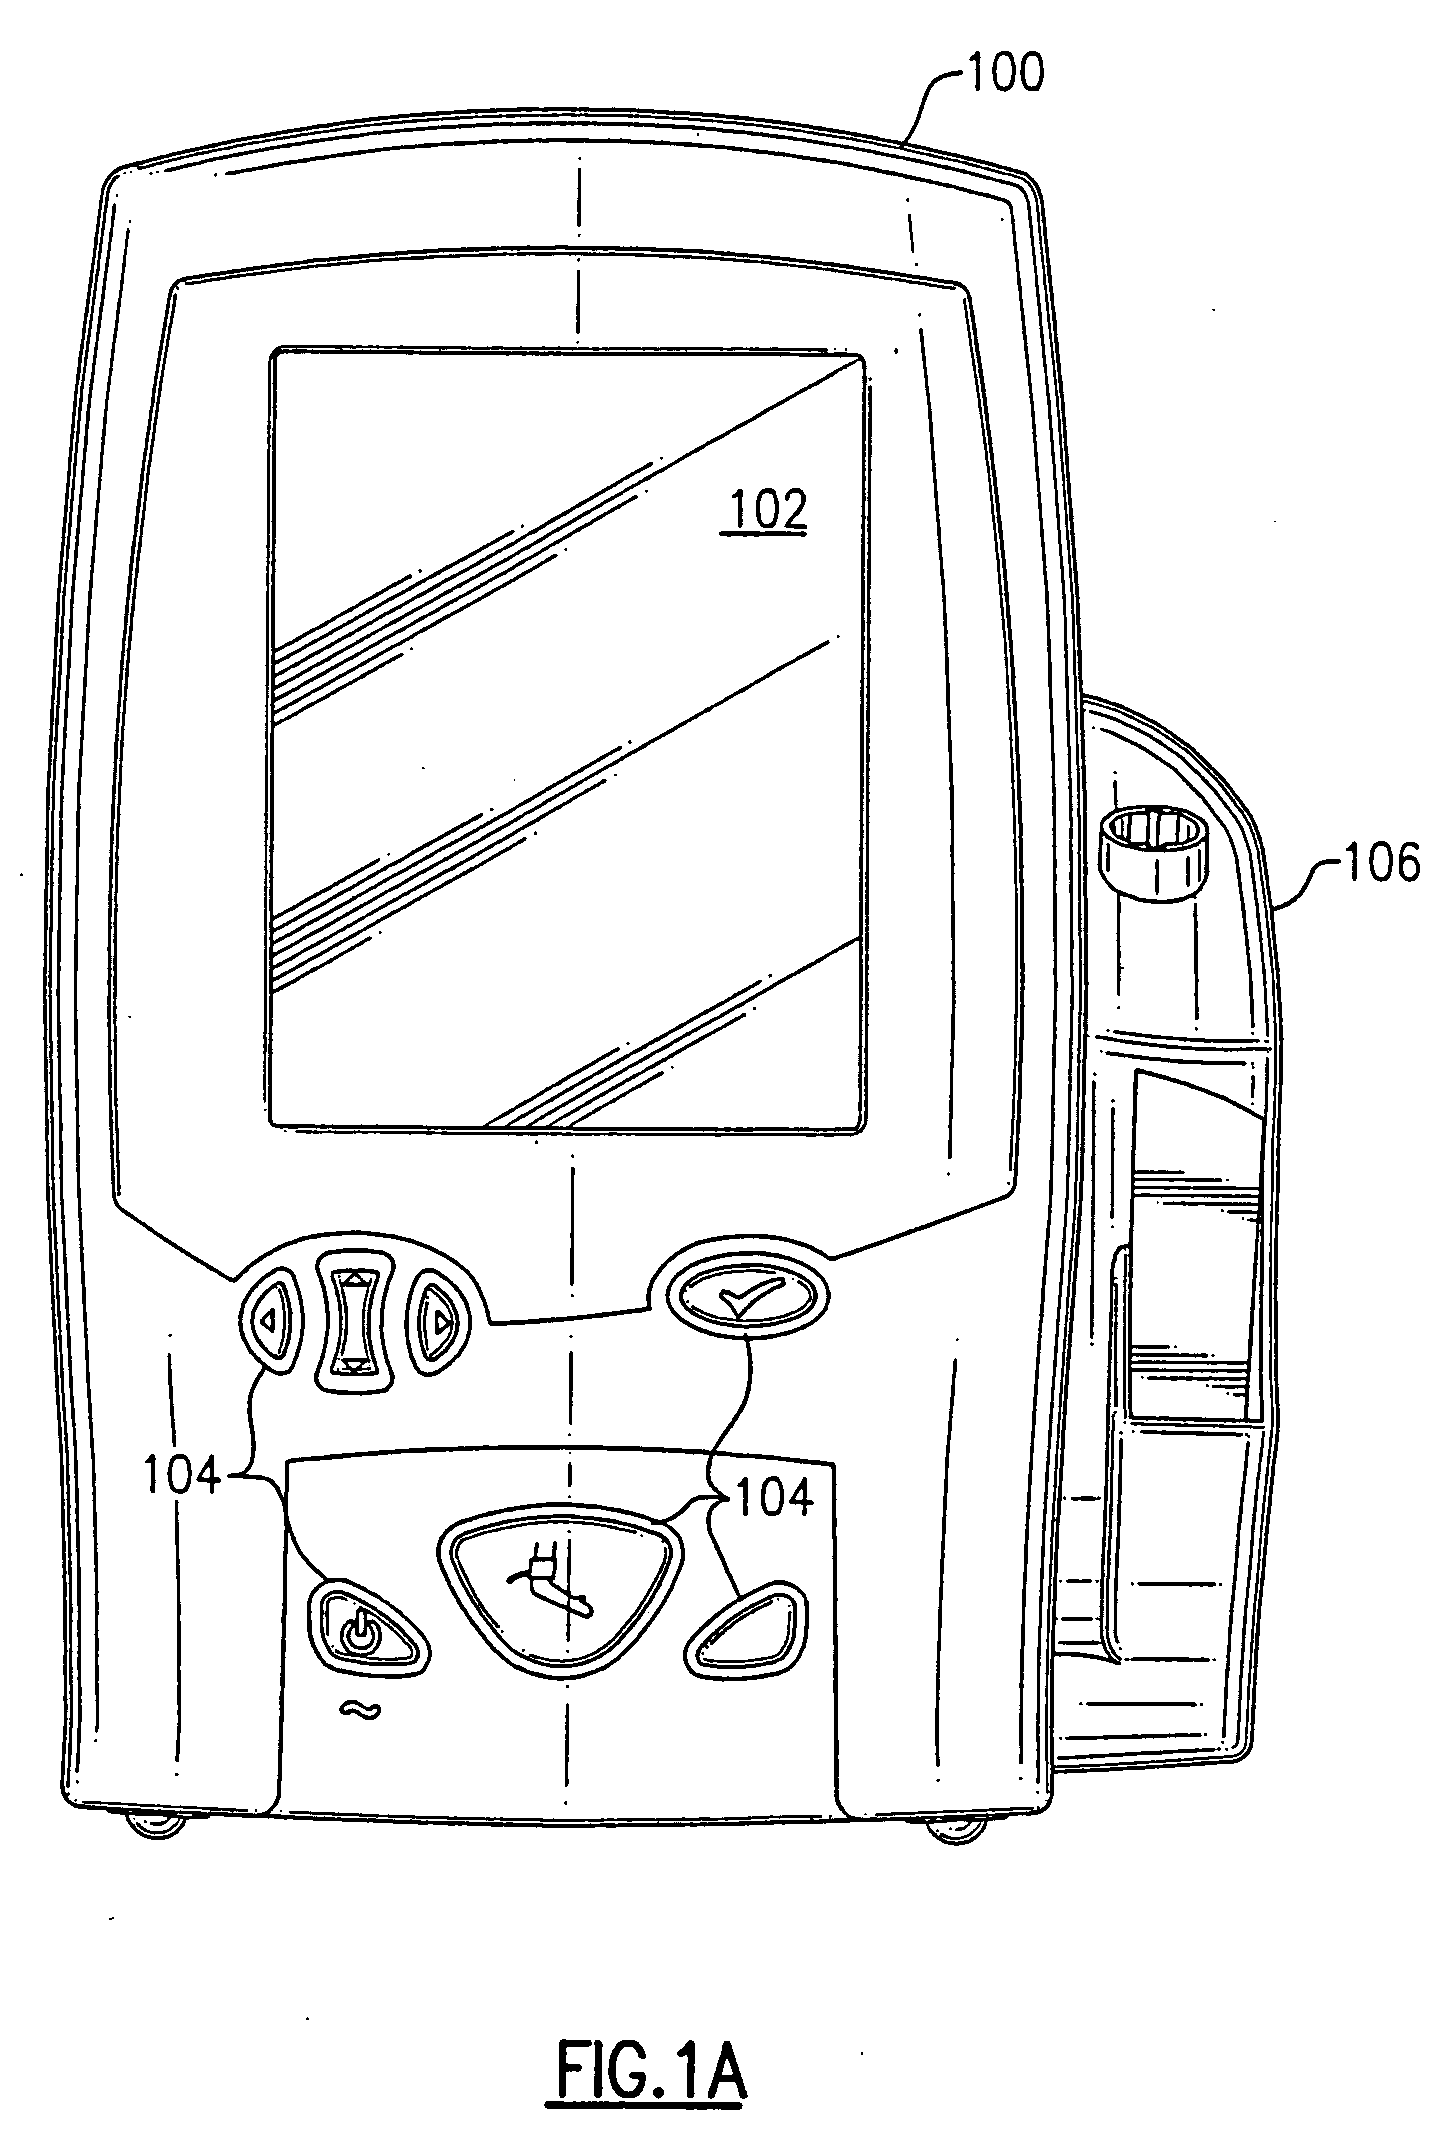 Portable vital signs measurement instrument and method of use thereof